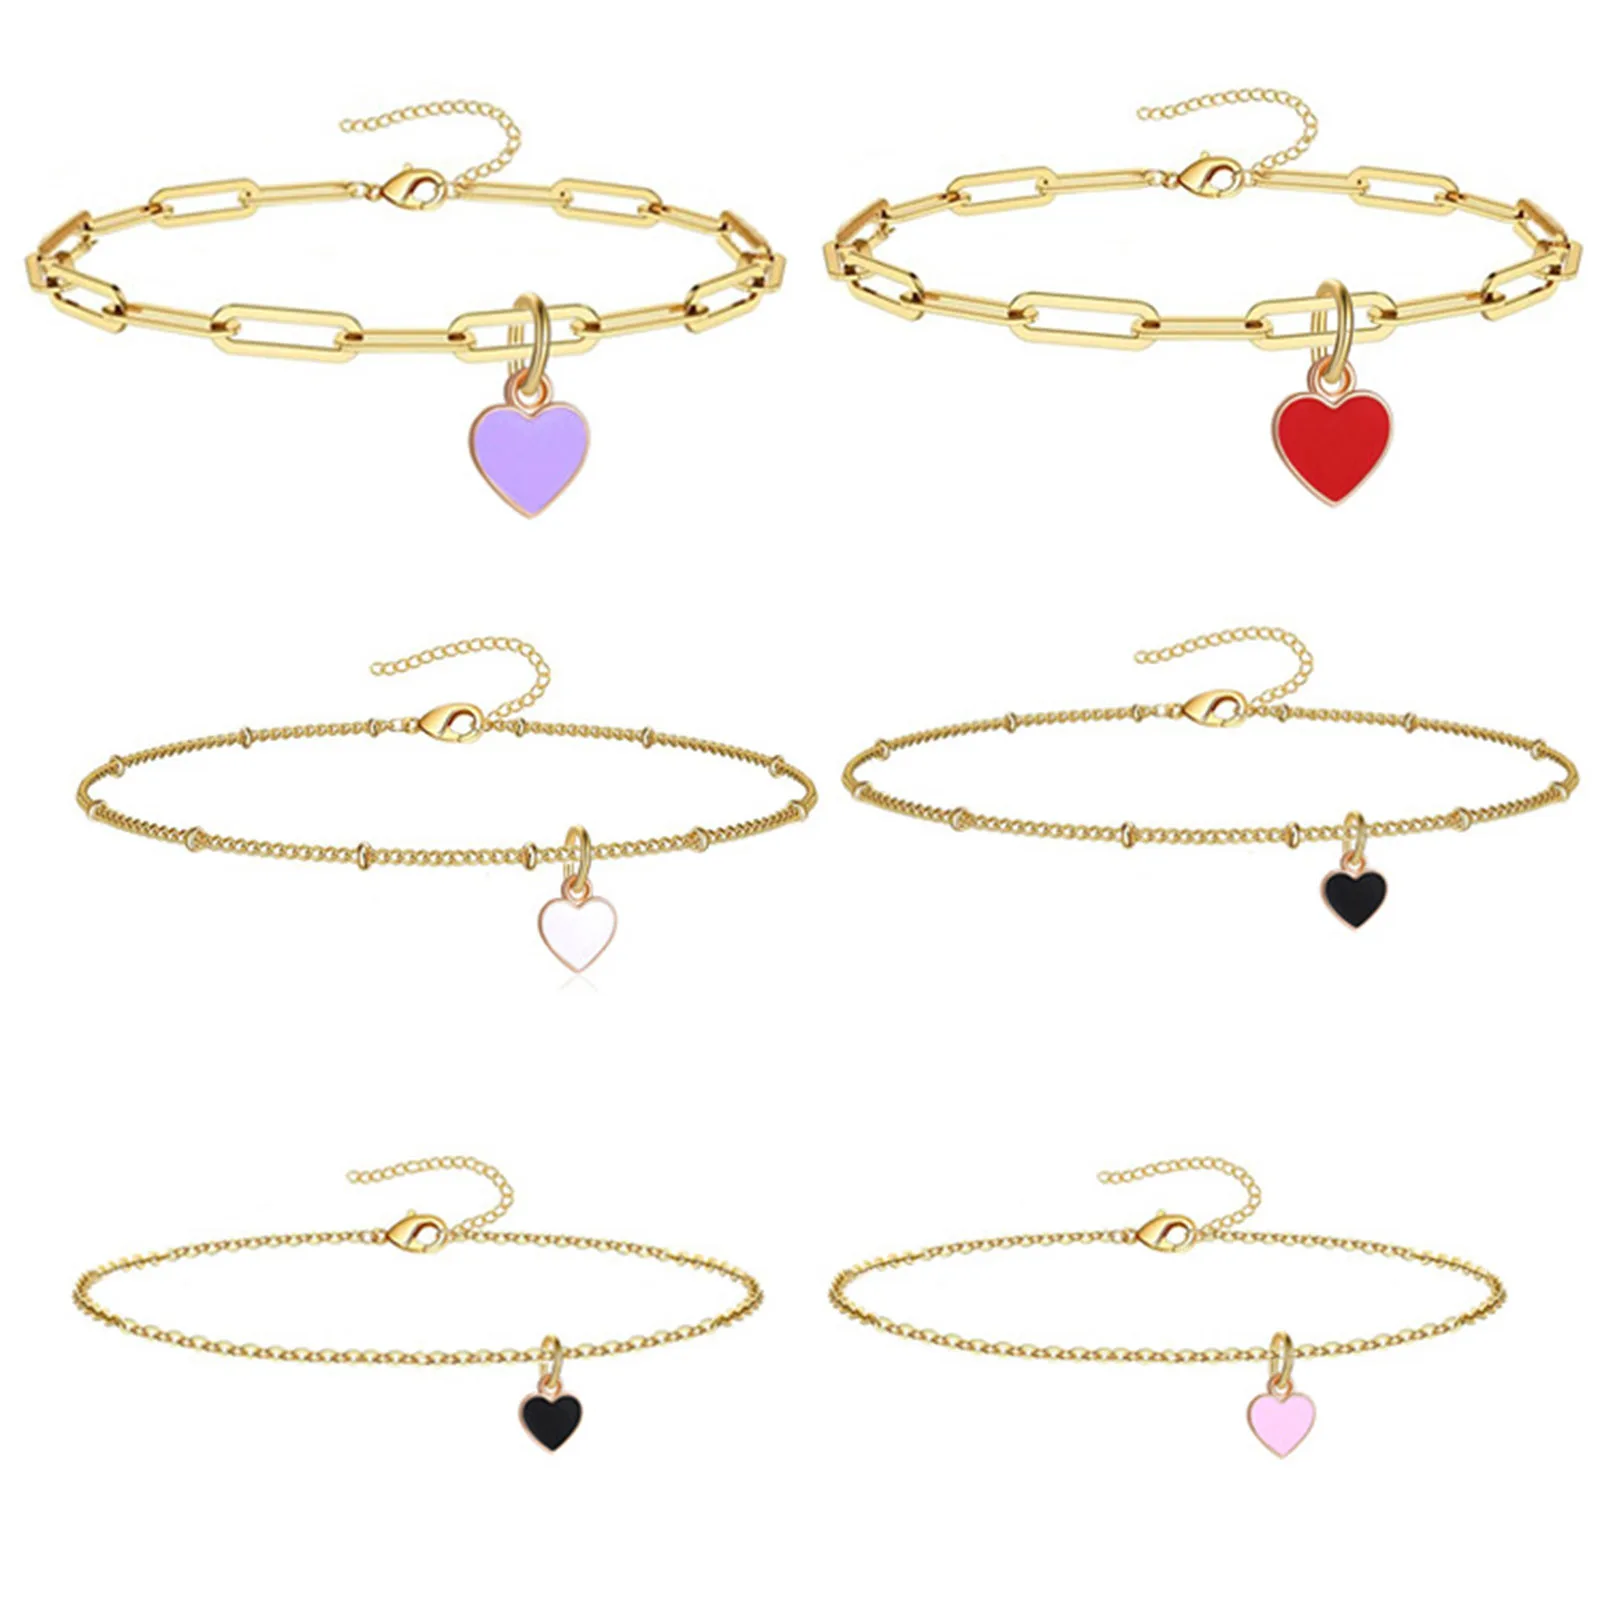 Stainless Steel Anklet Gold Color Link Chain Enamel Heart Summer Beach On Foot Ankle Bracelet Valentine's Day Jewelry 21cm long